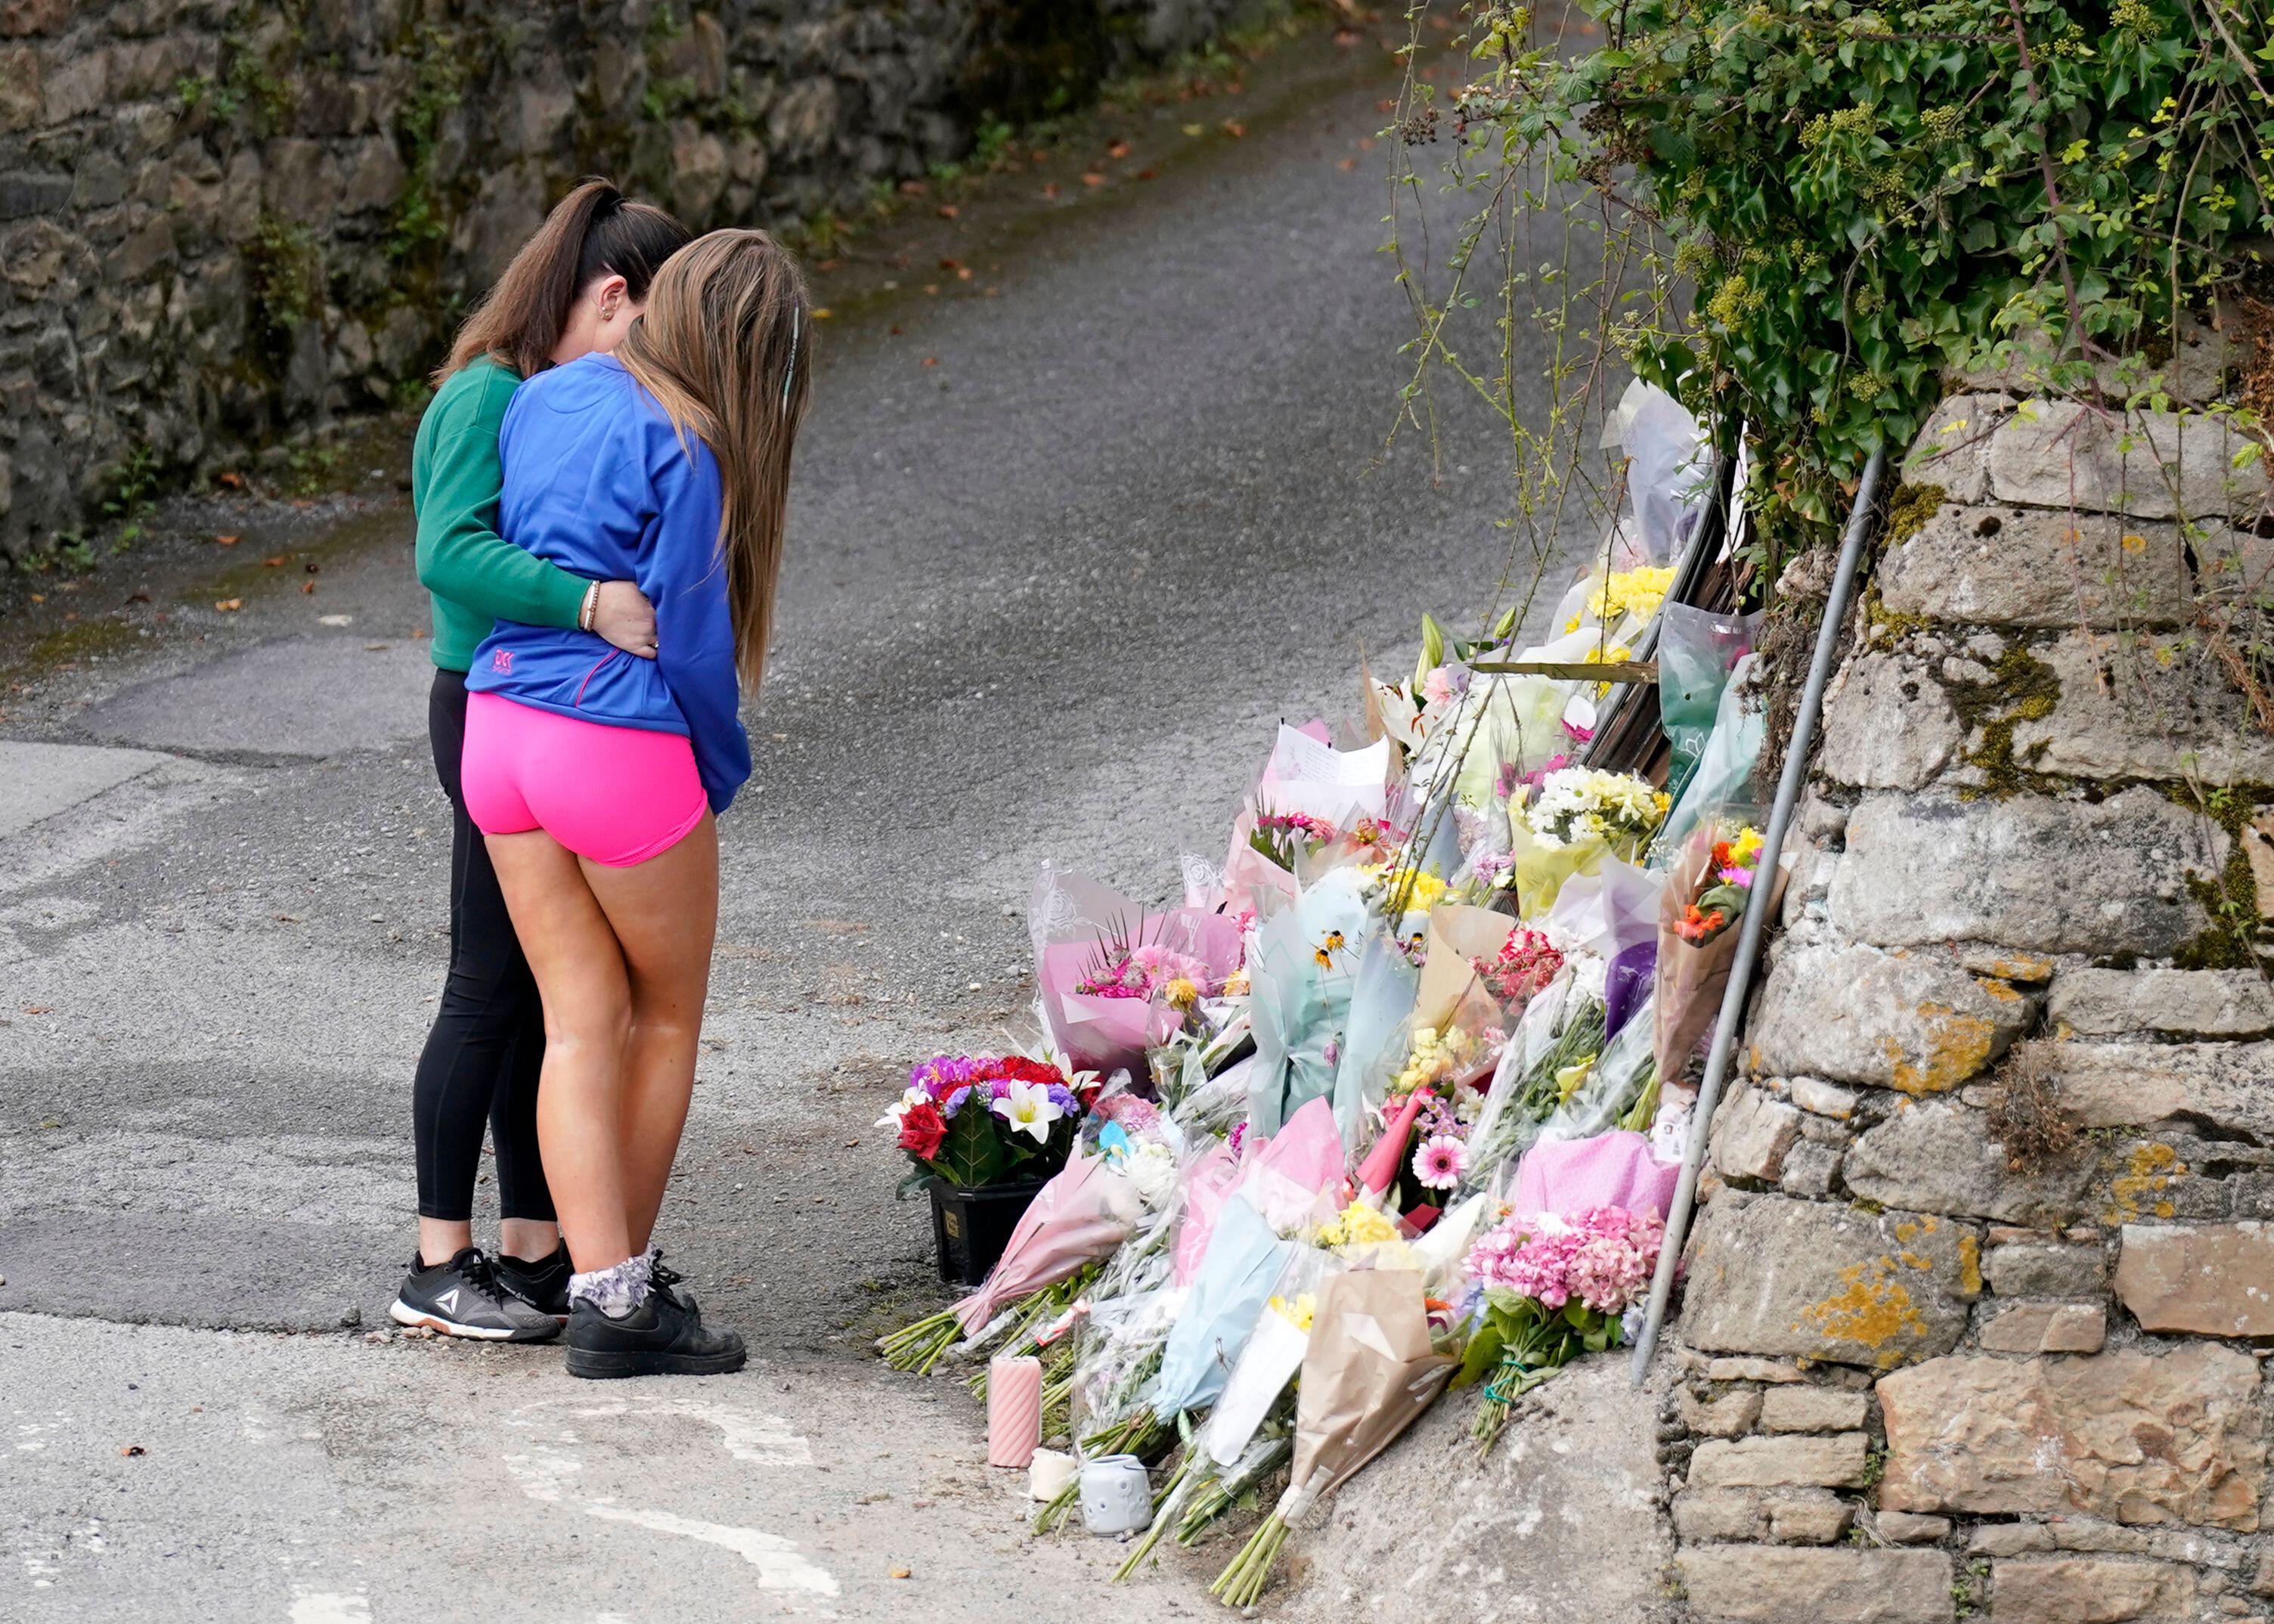 Prayer vigil marks death of four young people in road crash